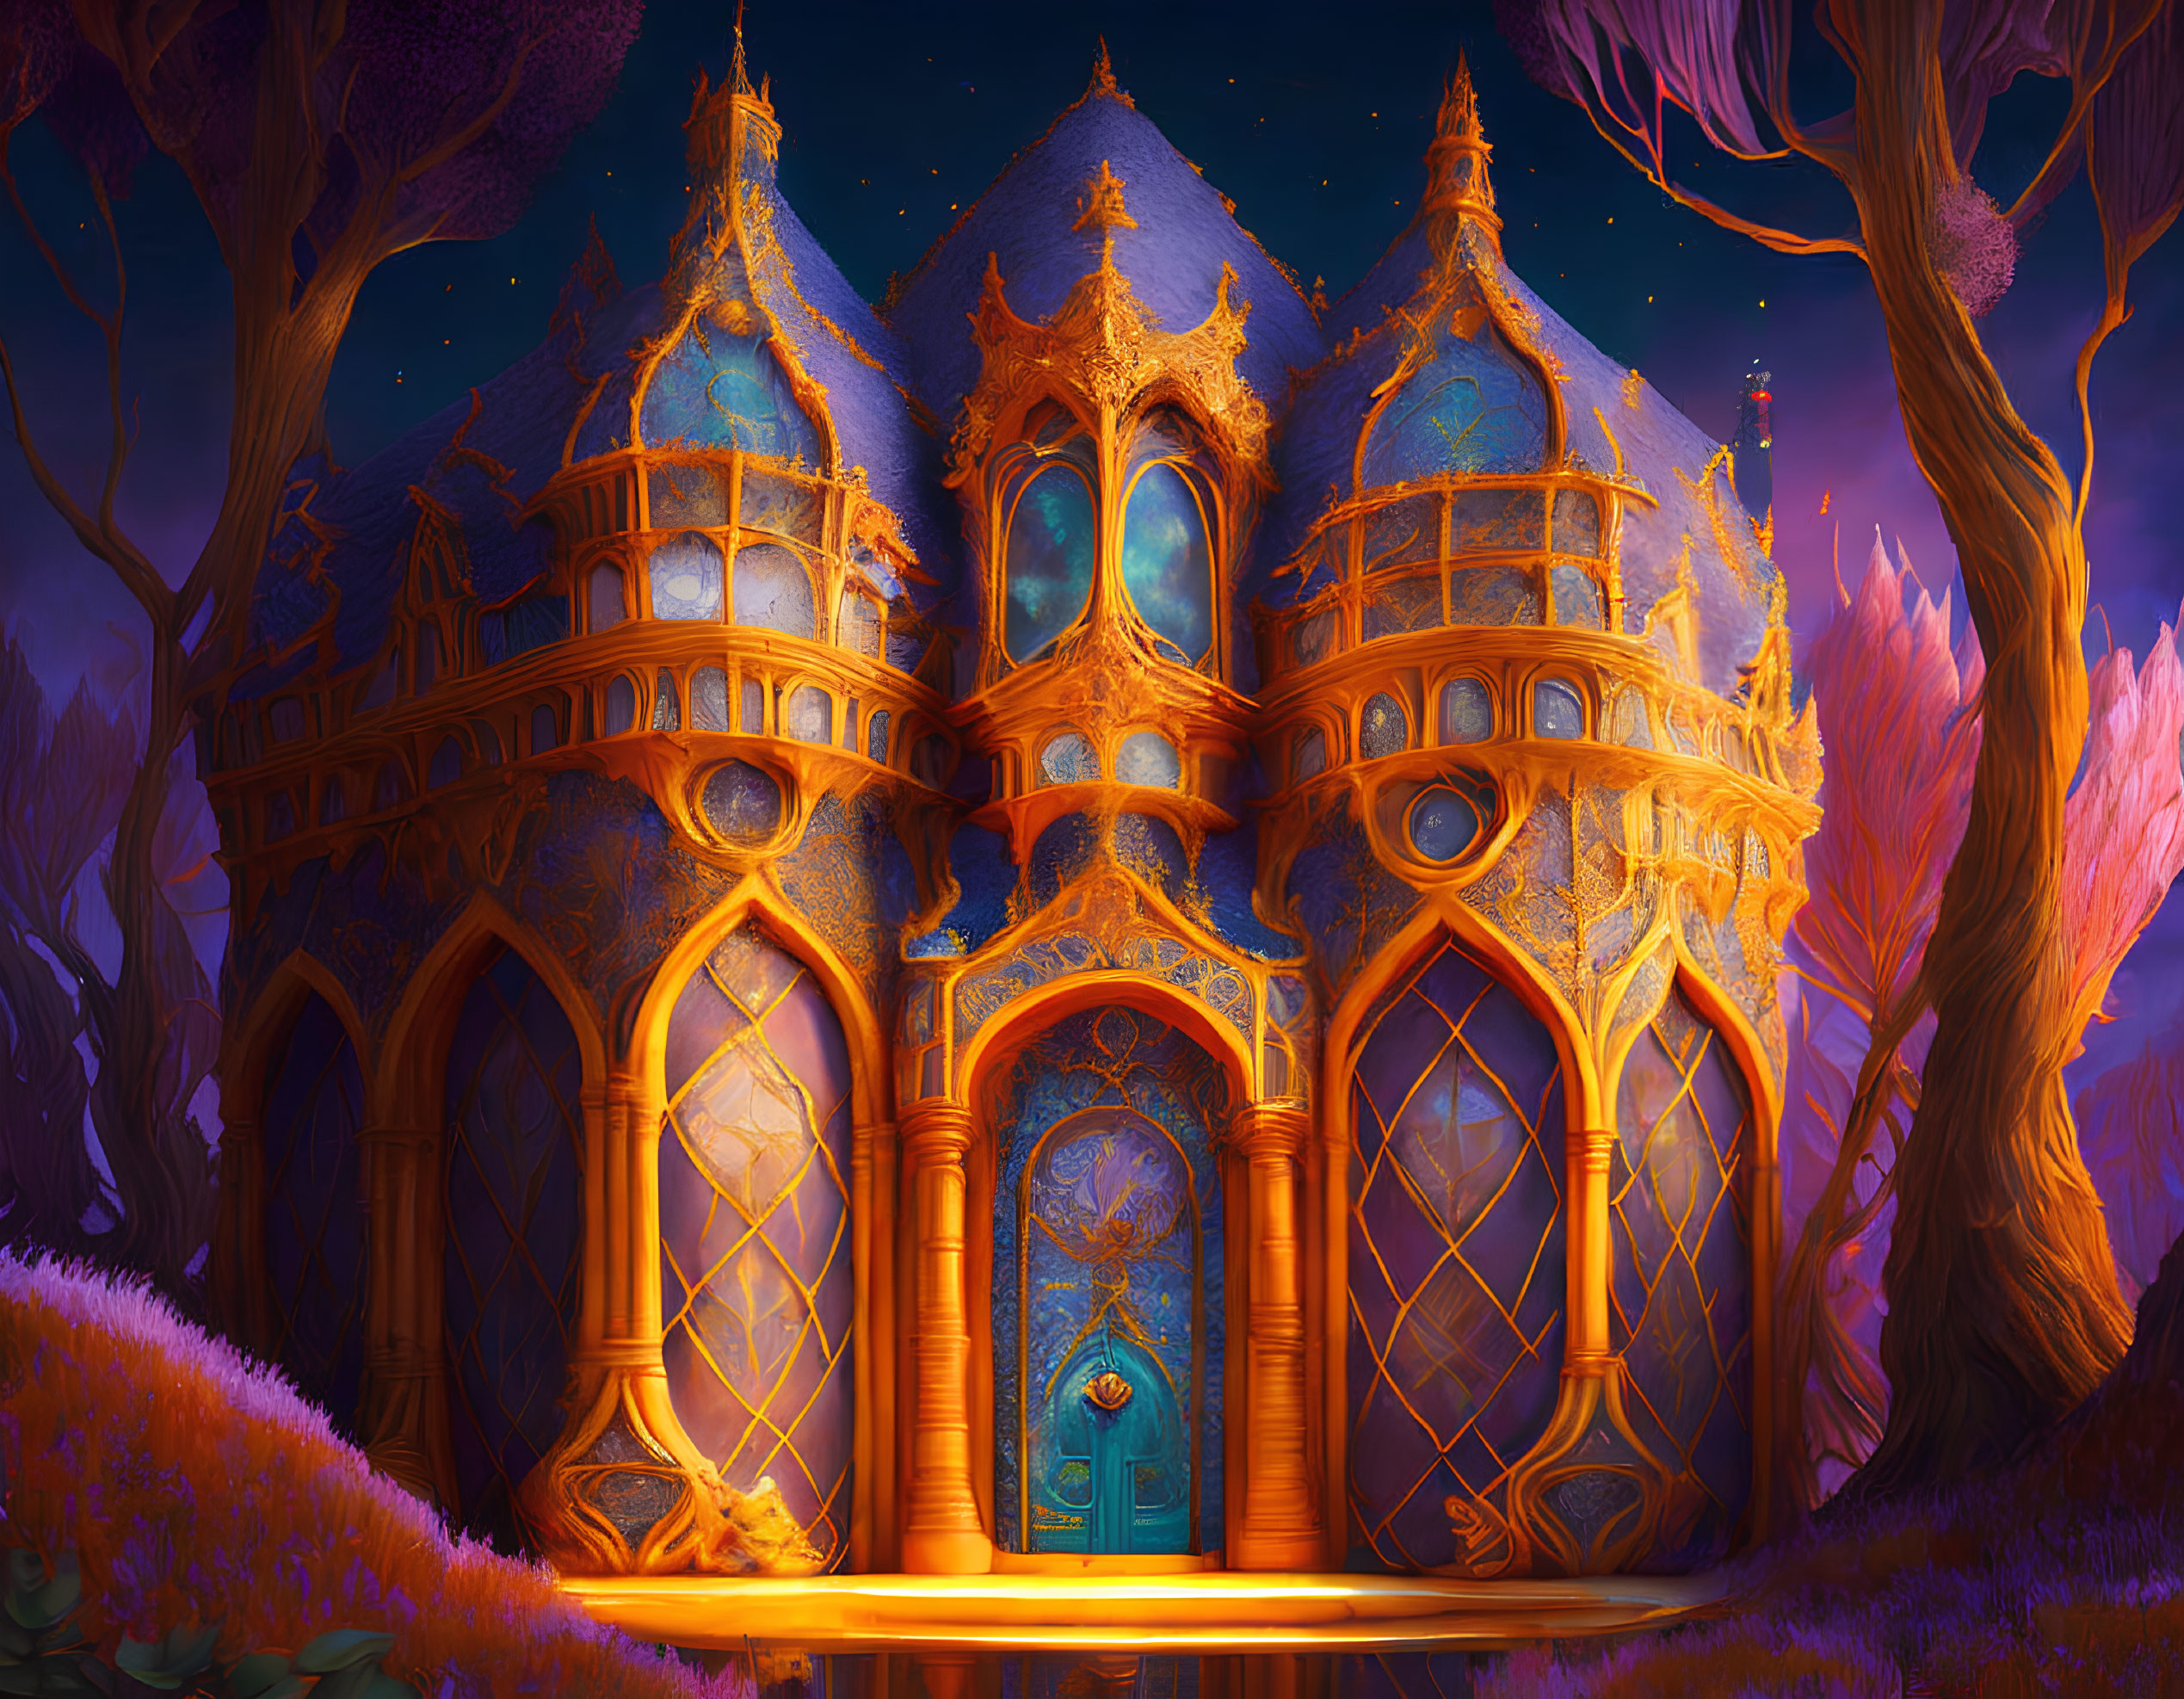 Fantastical golden castle in magical forest with violet and pink foliage